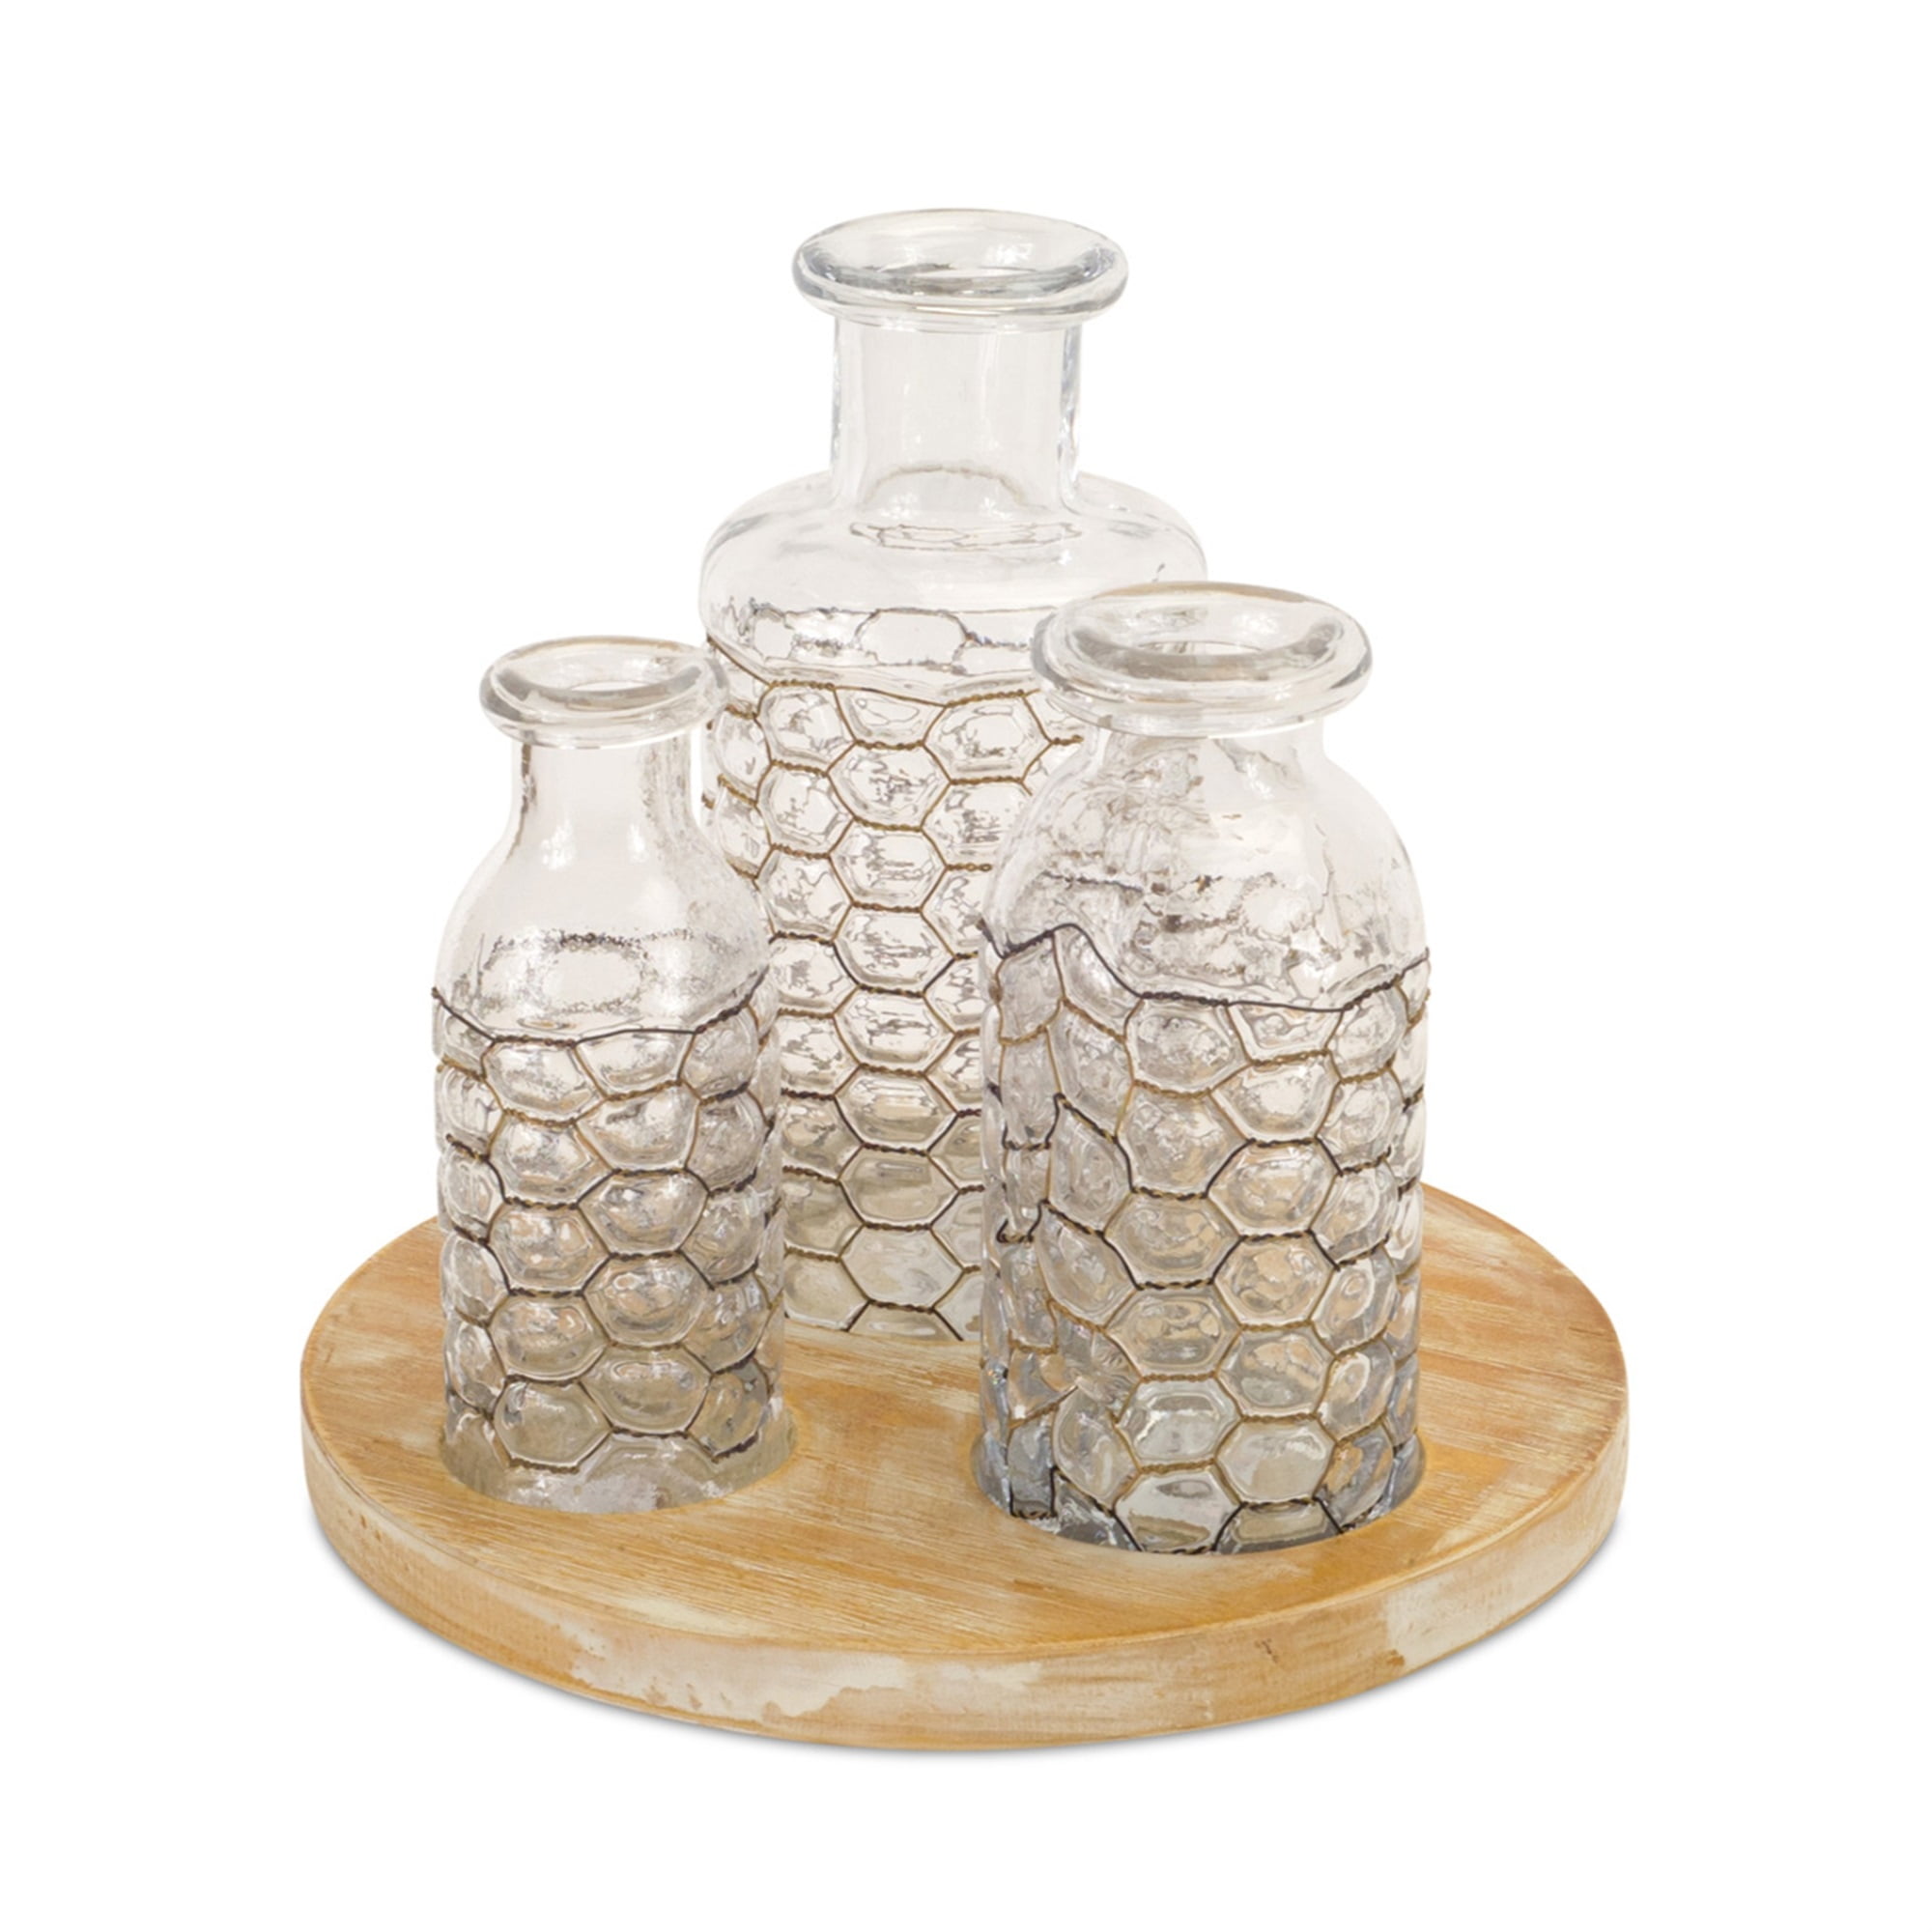 Jars w/Chicken Wire Wrap 9"H Glass/Wire, includes Tray 9.75"D Wood